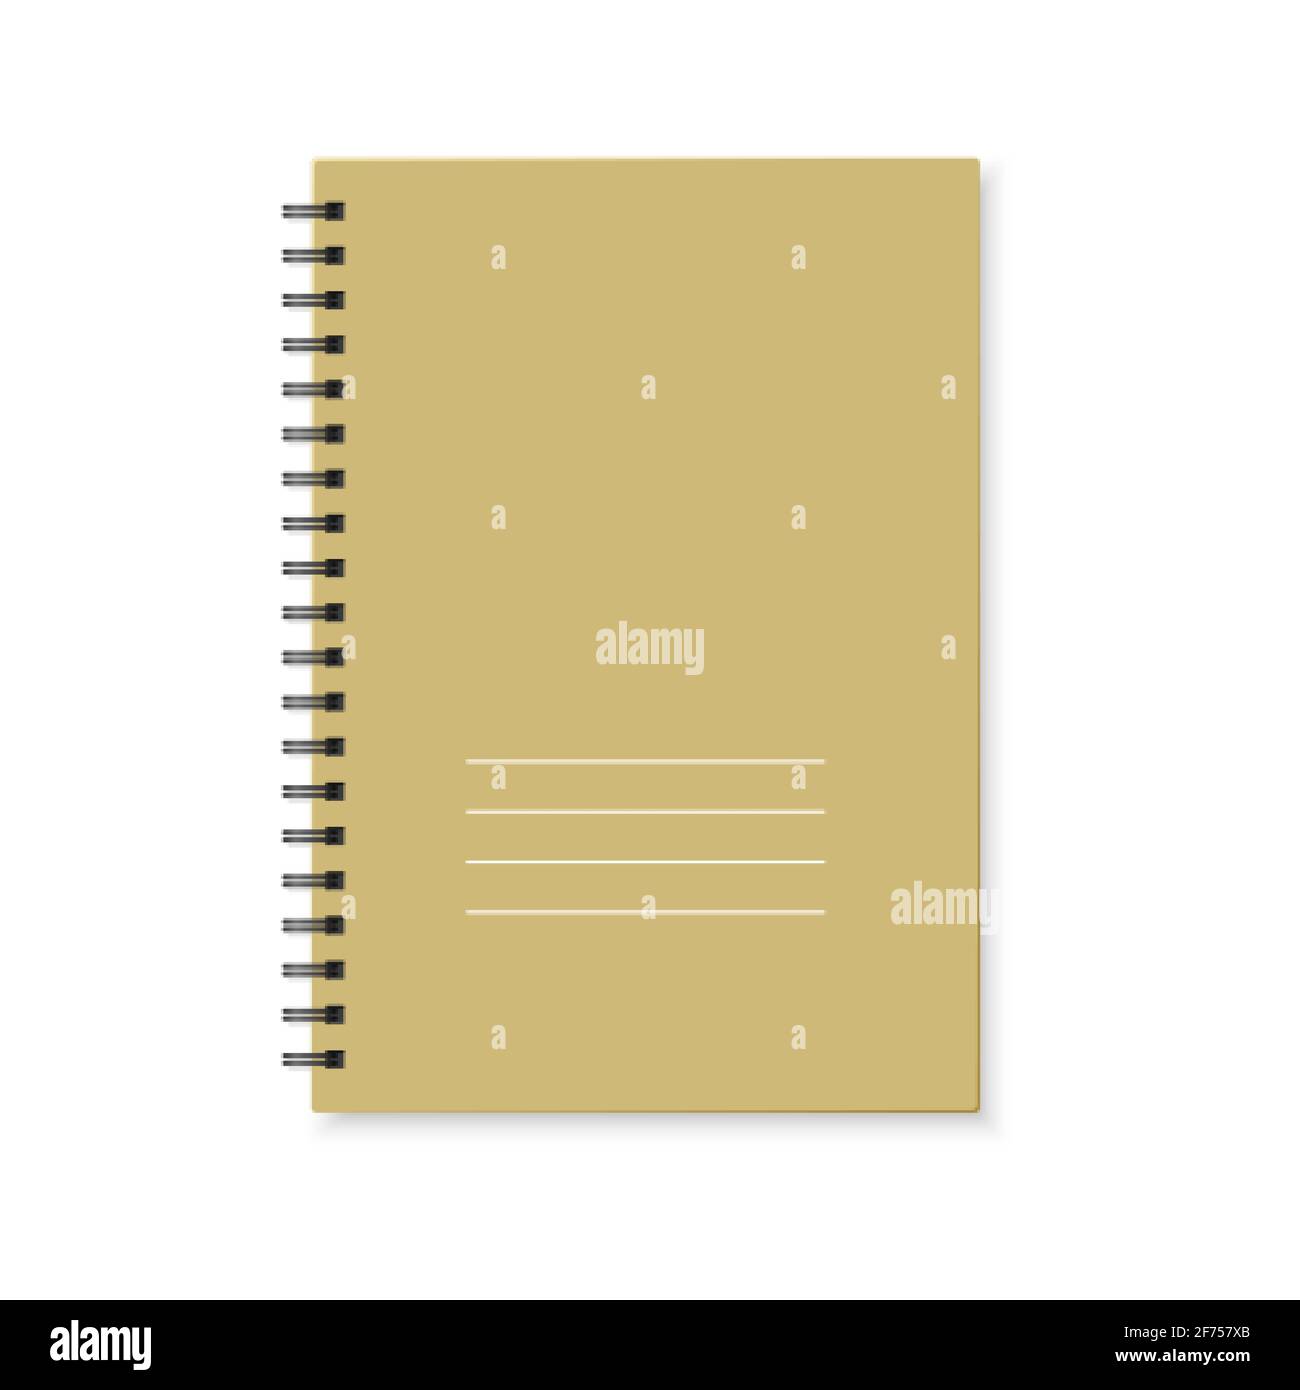 https://c8.alamy.com/comp/2F757XB/notebook-with-color-cover-and-spiral-binding-realistic-copybook-on-white-background-vector-2F757XB.jpg